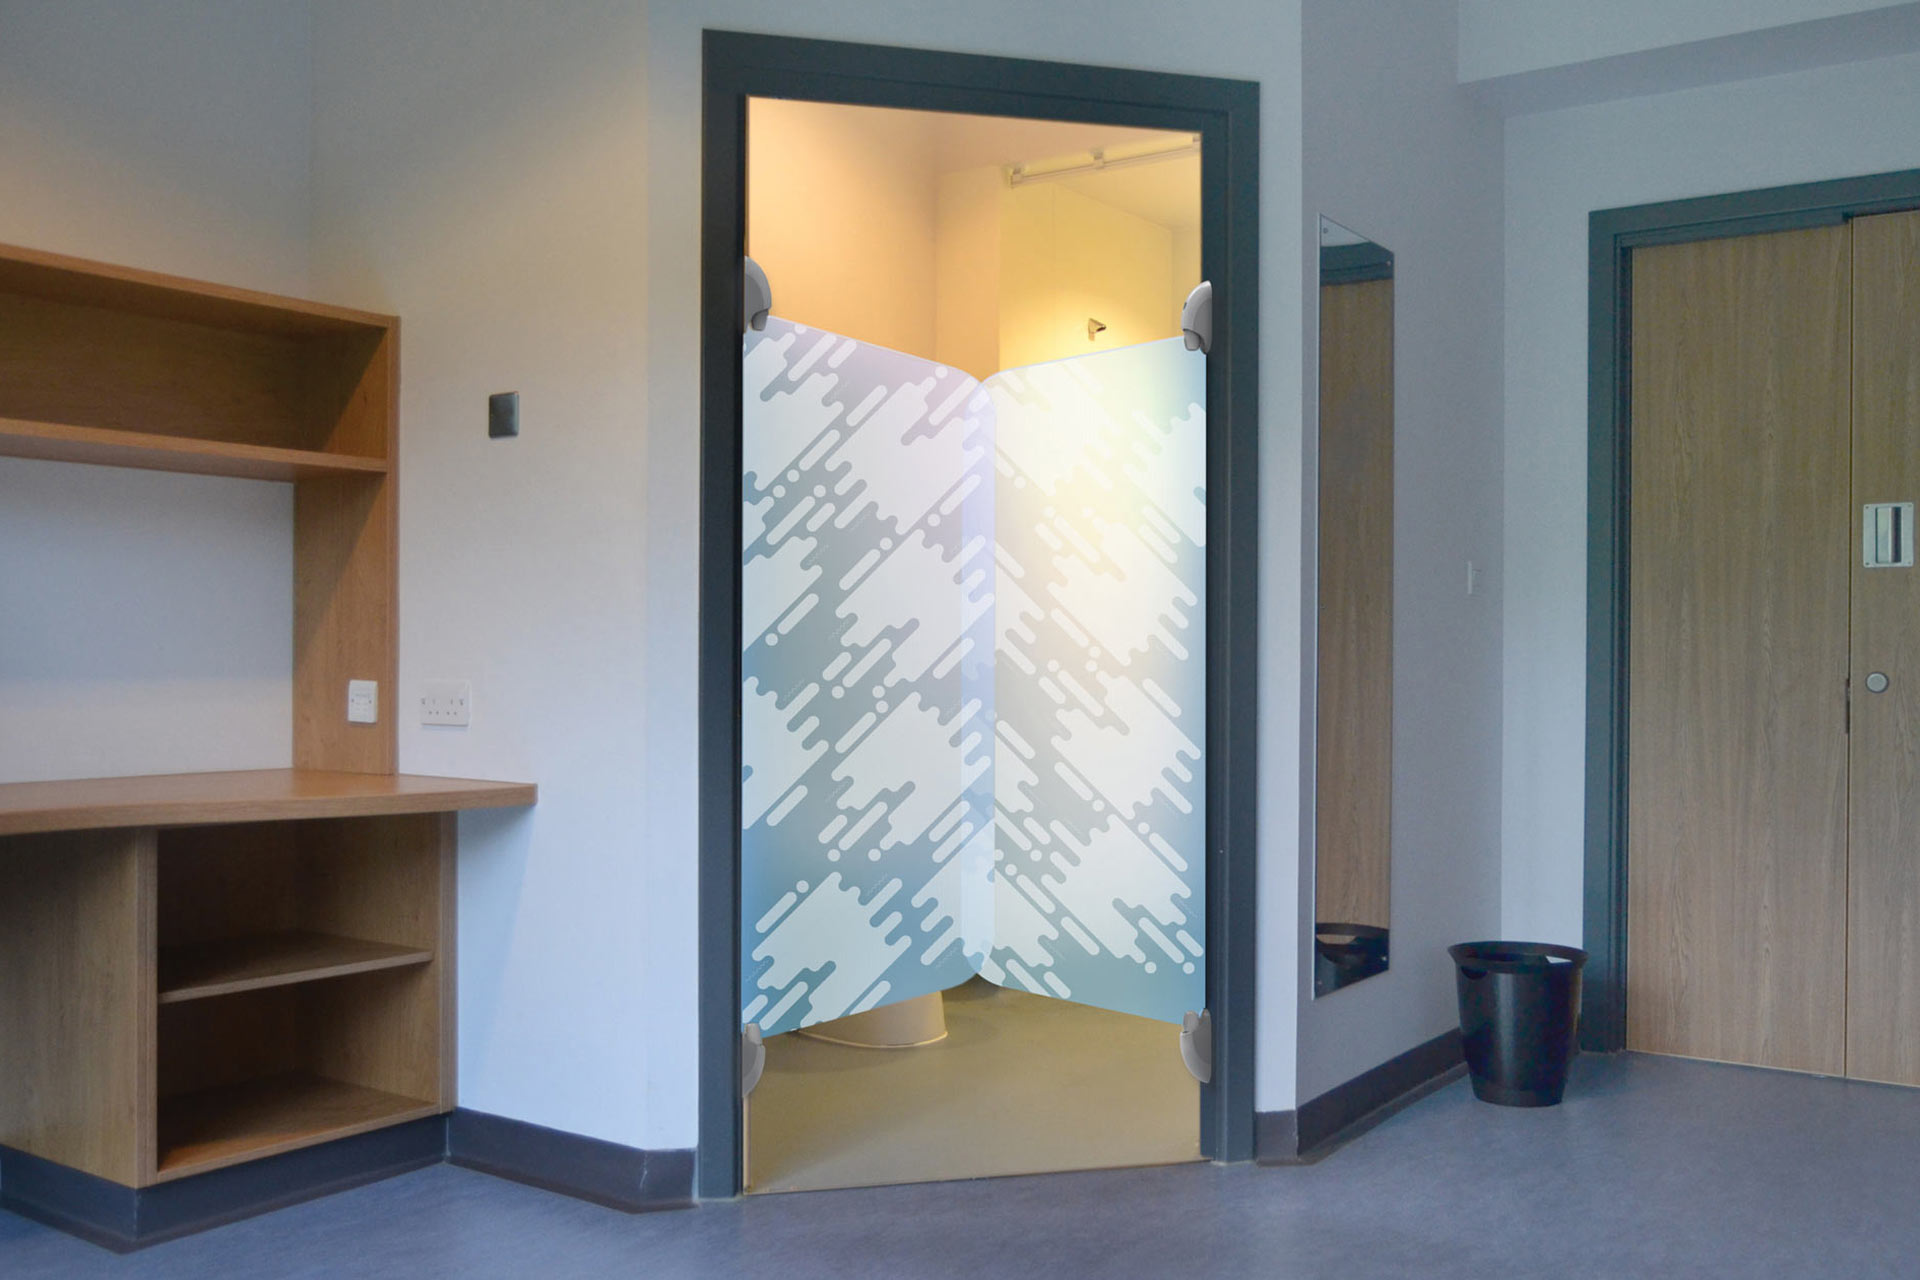 The Symphony En-Suite Door, manufactured by Safehinge, won the Product Innovation Award